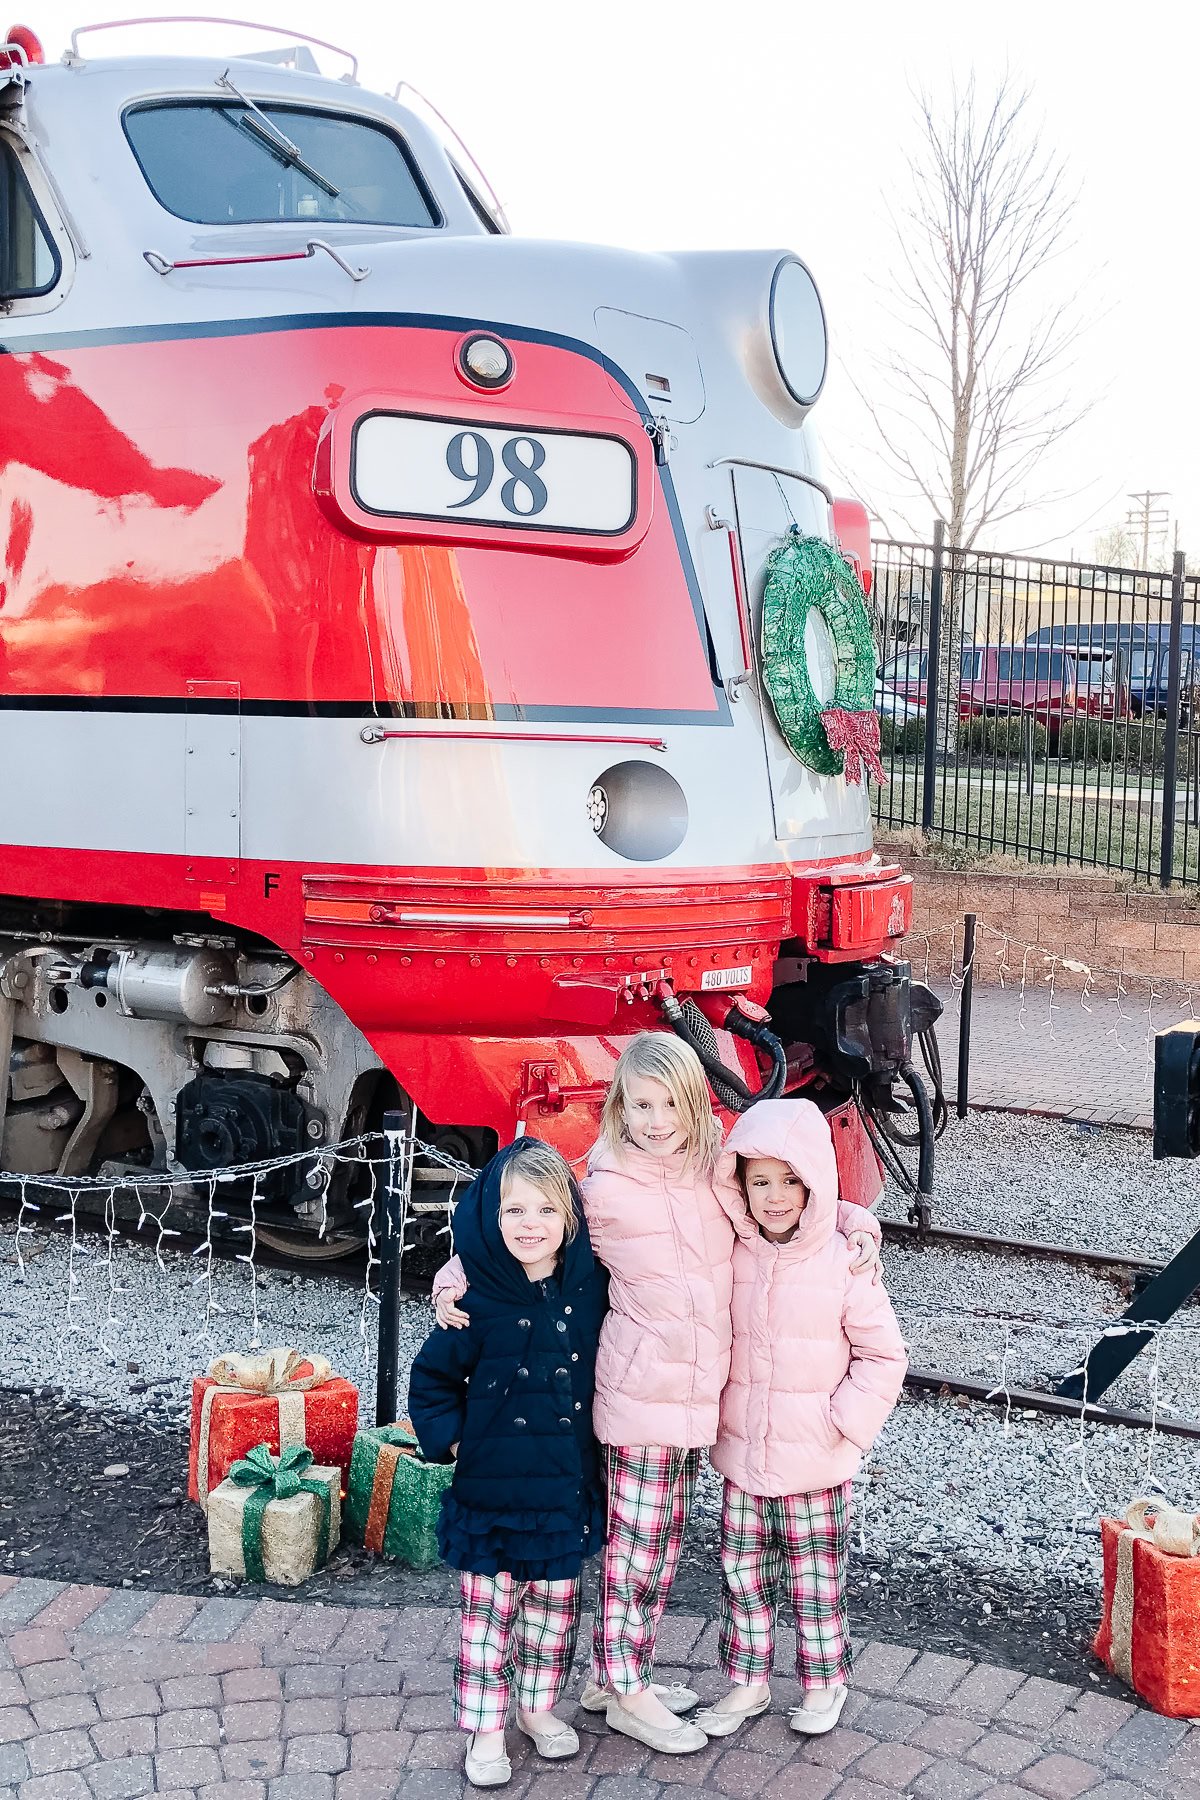 Three children in winter coats and matching plaid pants stand in front of a festive red and silver train engine decorated with a green wreath, one of the many charming things to do in Branson. Wrapped presents are placed on the ground nearby.